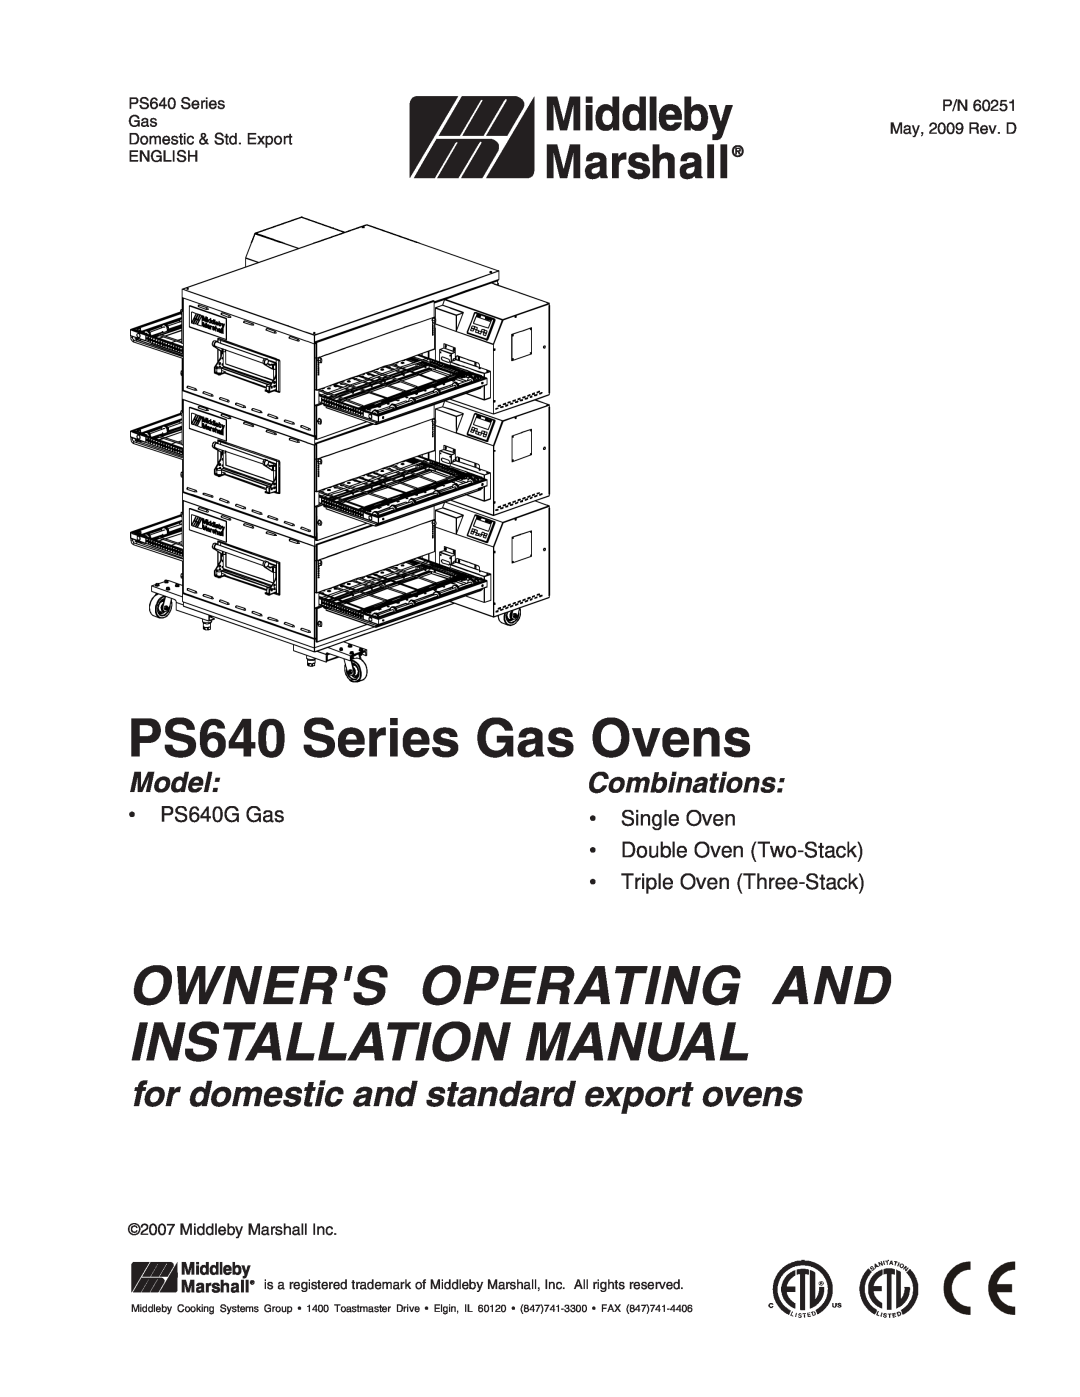 Middleby Marshall installation manual PS640 Series Gas Ovens, Owners Operating And Installation Manual, Model 